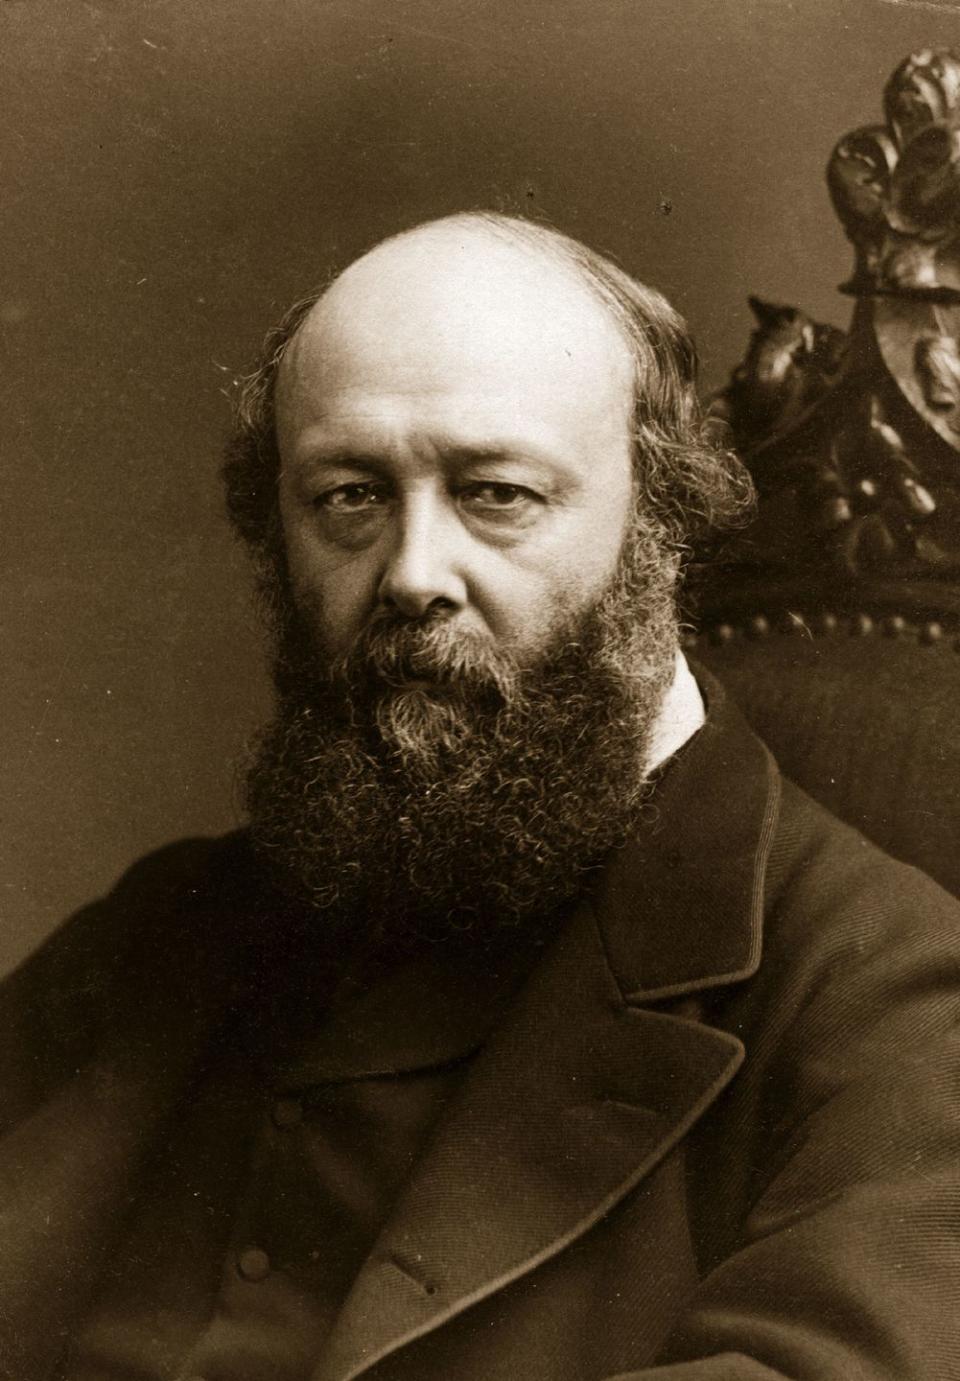 lord salisbury wears a jacket and formal attire as he stares at the camera